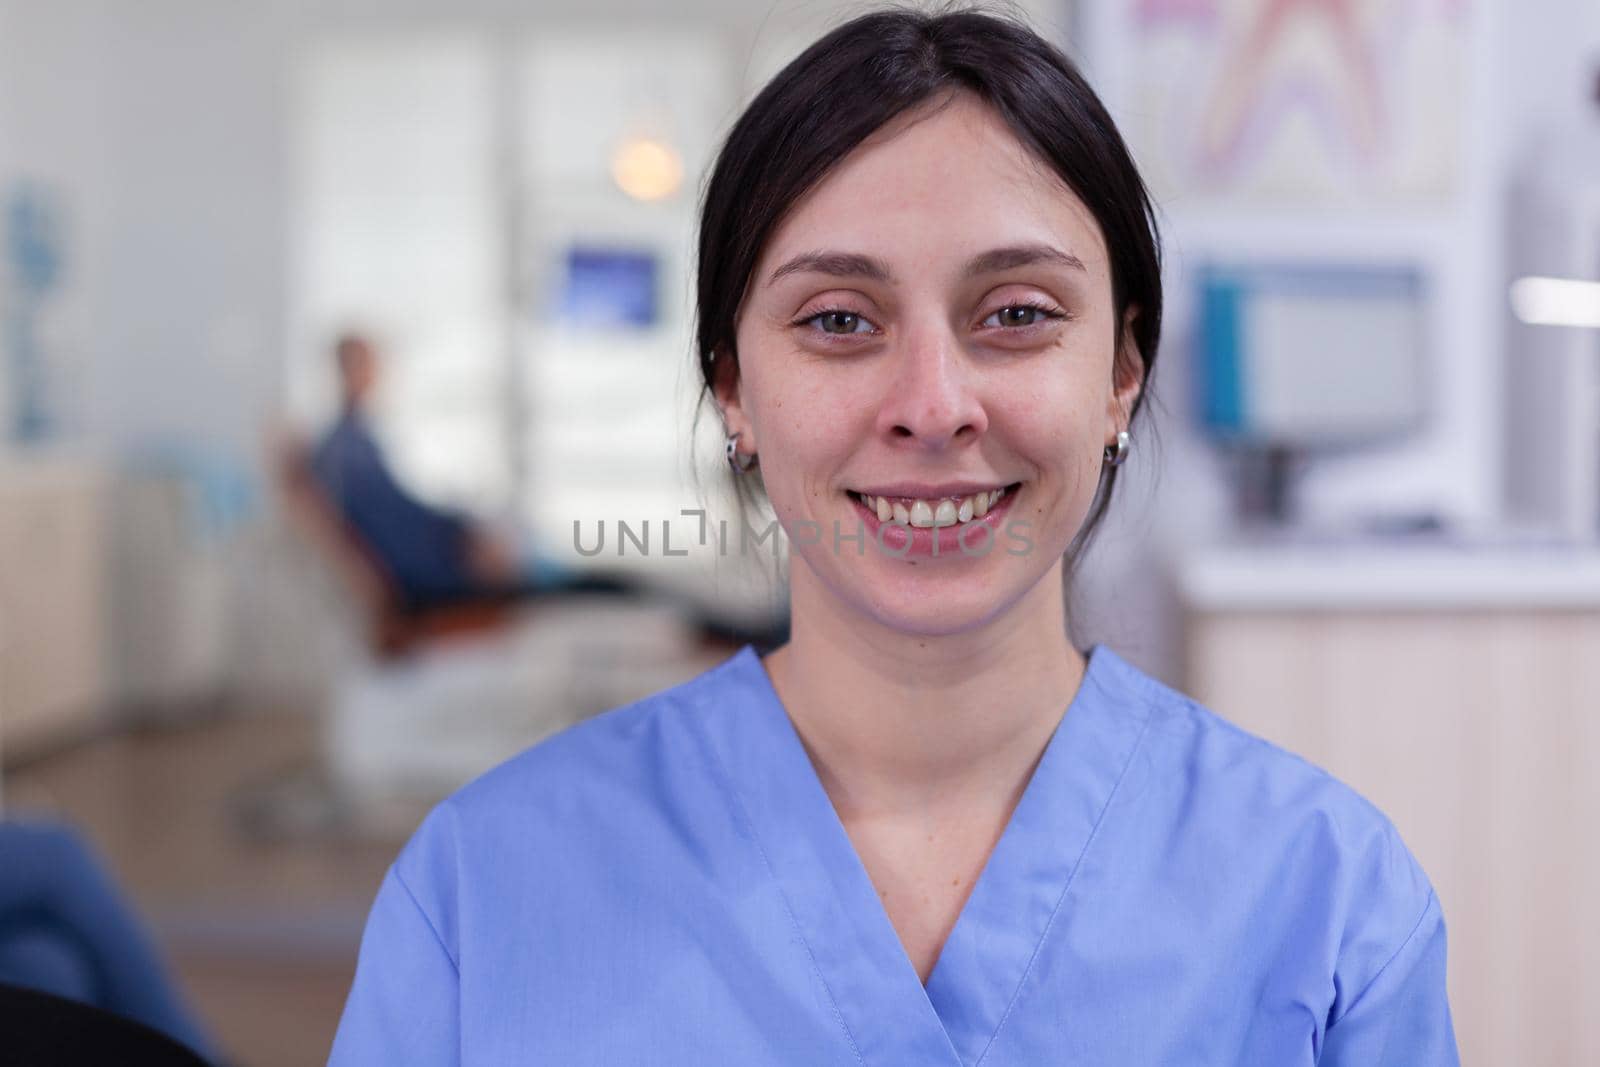 Dental assistant looking at camera in waiting area by DCStudio